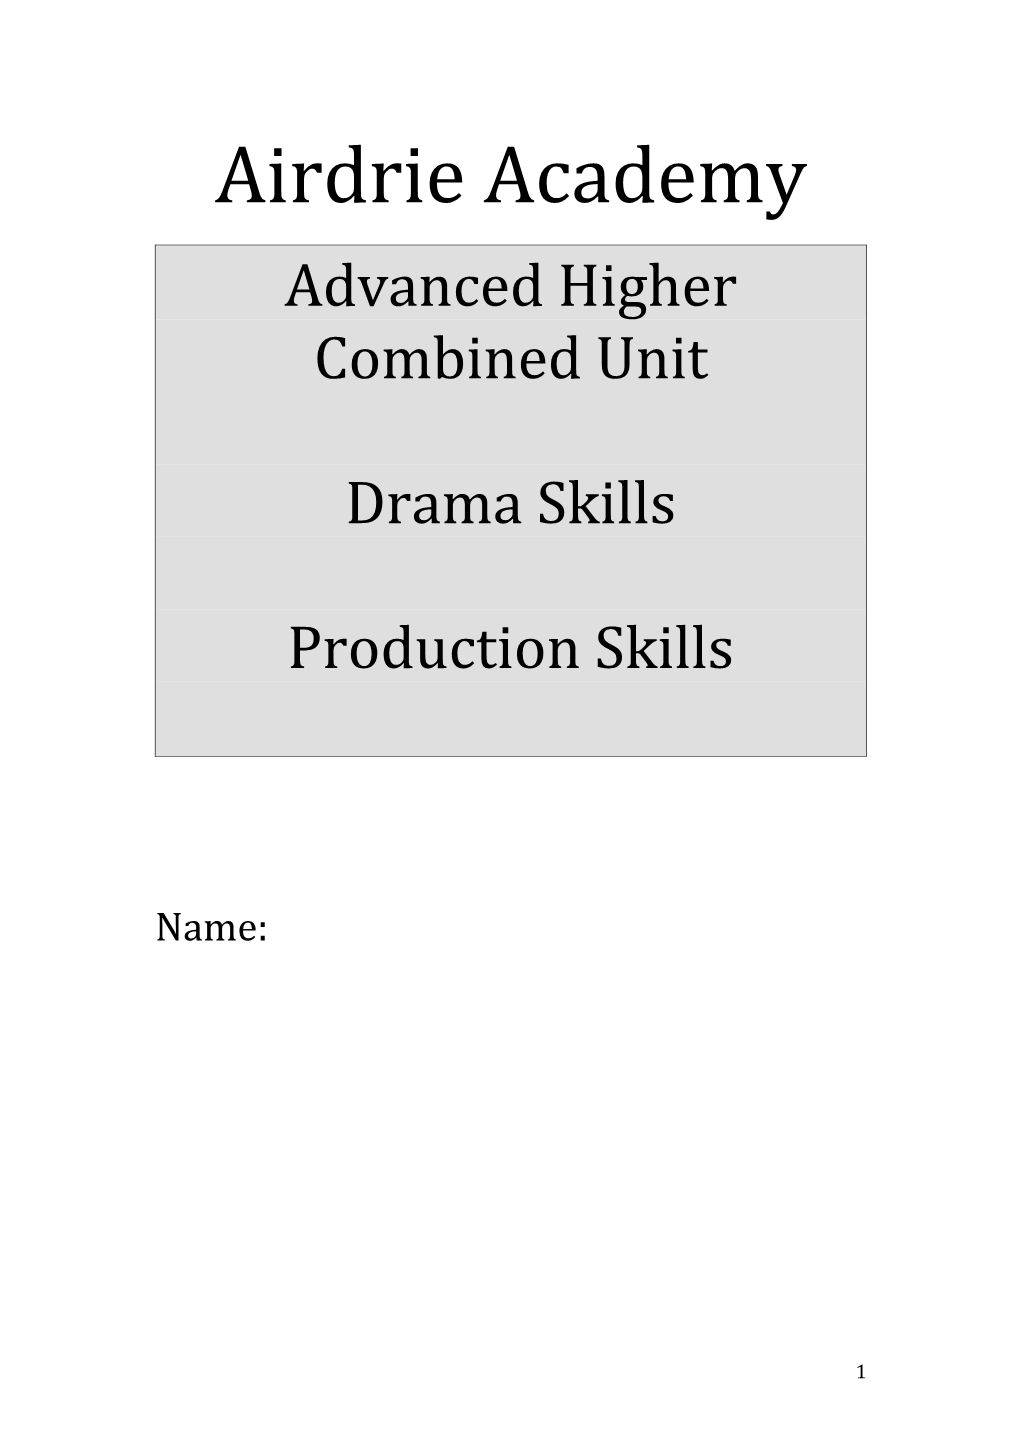 Combined Approach Drama Skills and Production Skills